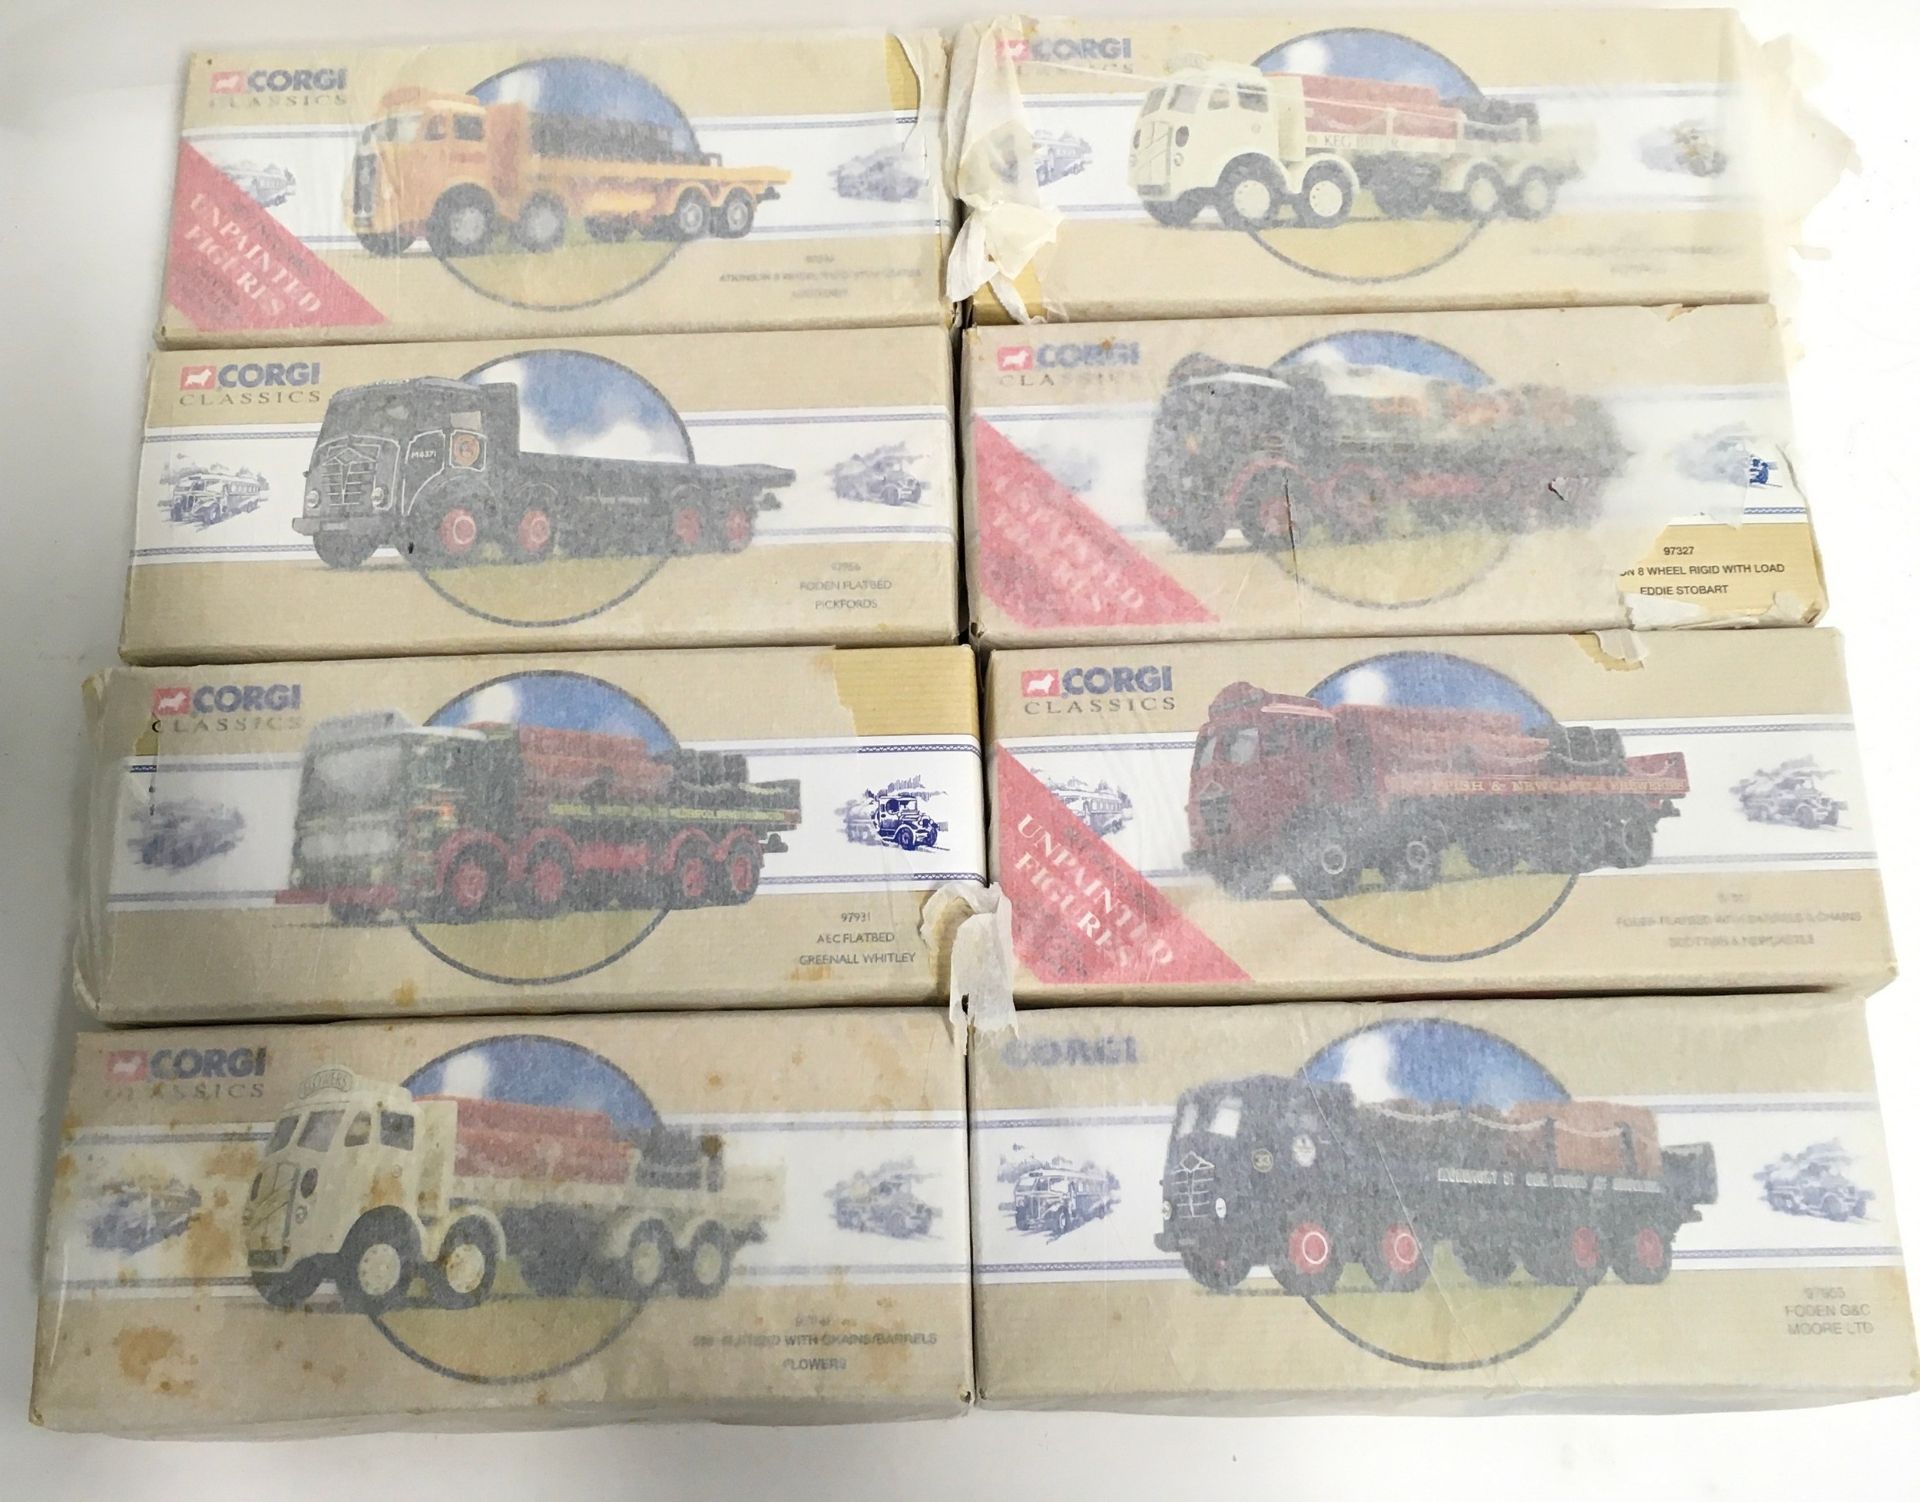 Corgi Classics group of models to include 97942 ERF Flatbed Flowers, 97327 Eddie Stobart and